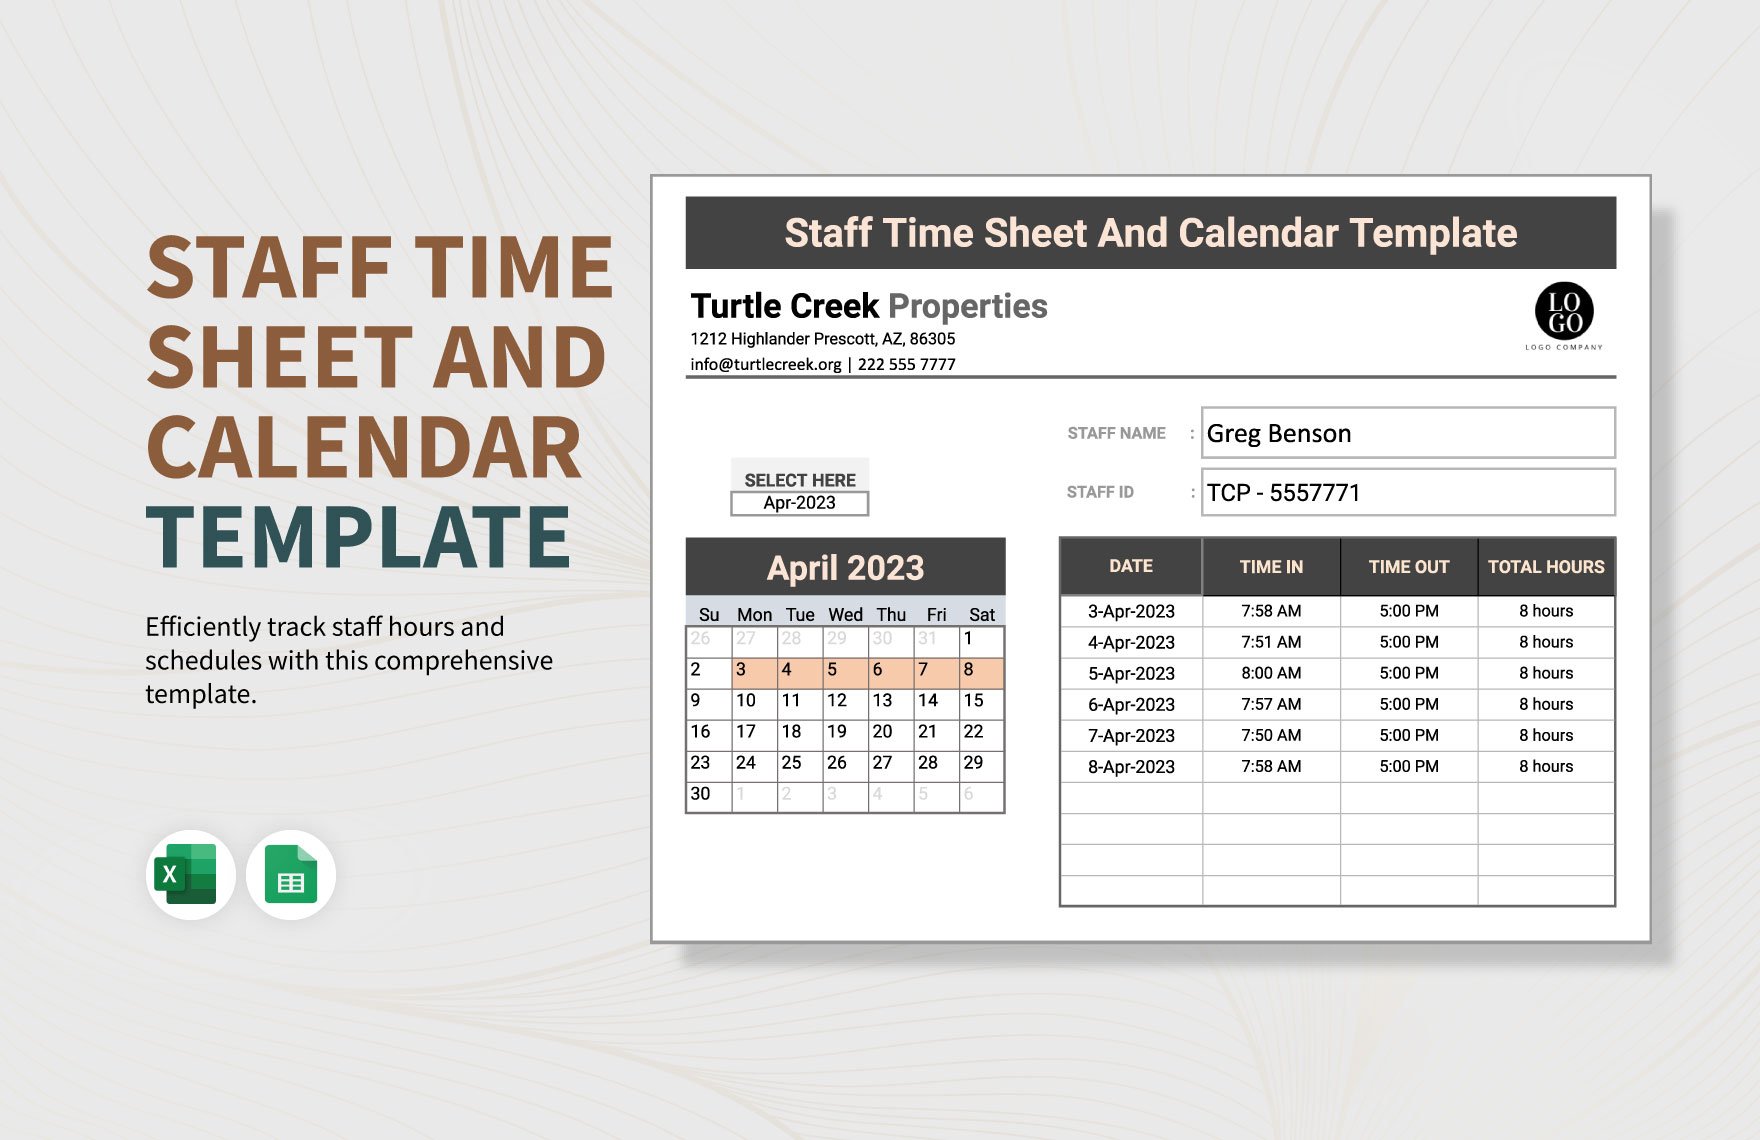 Staff Time Sheet And Calendar Template in Excel, Google Sheets